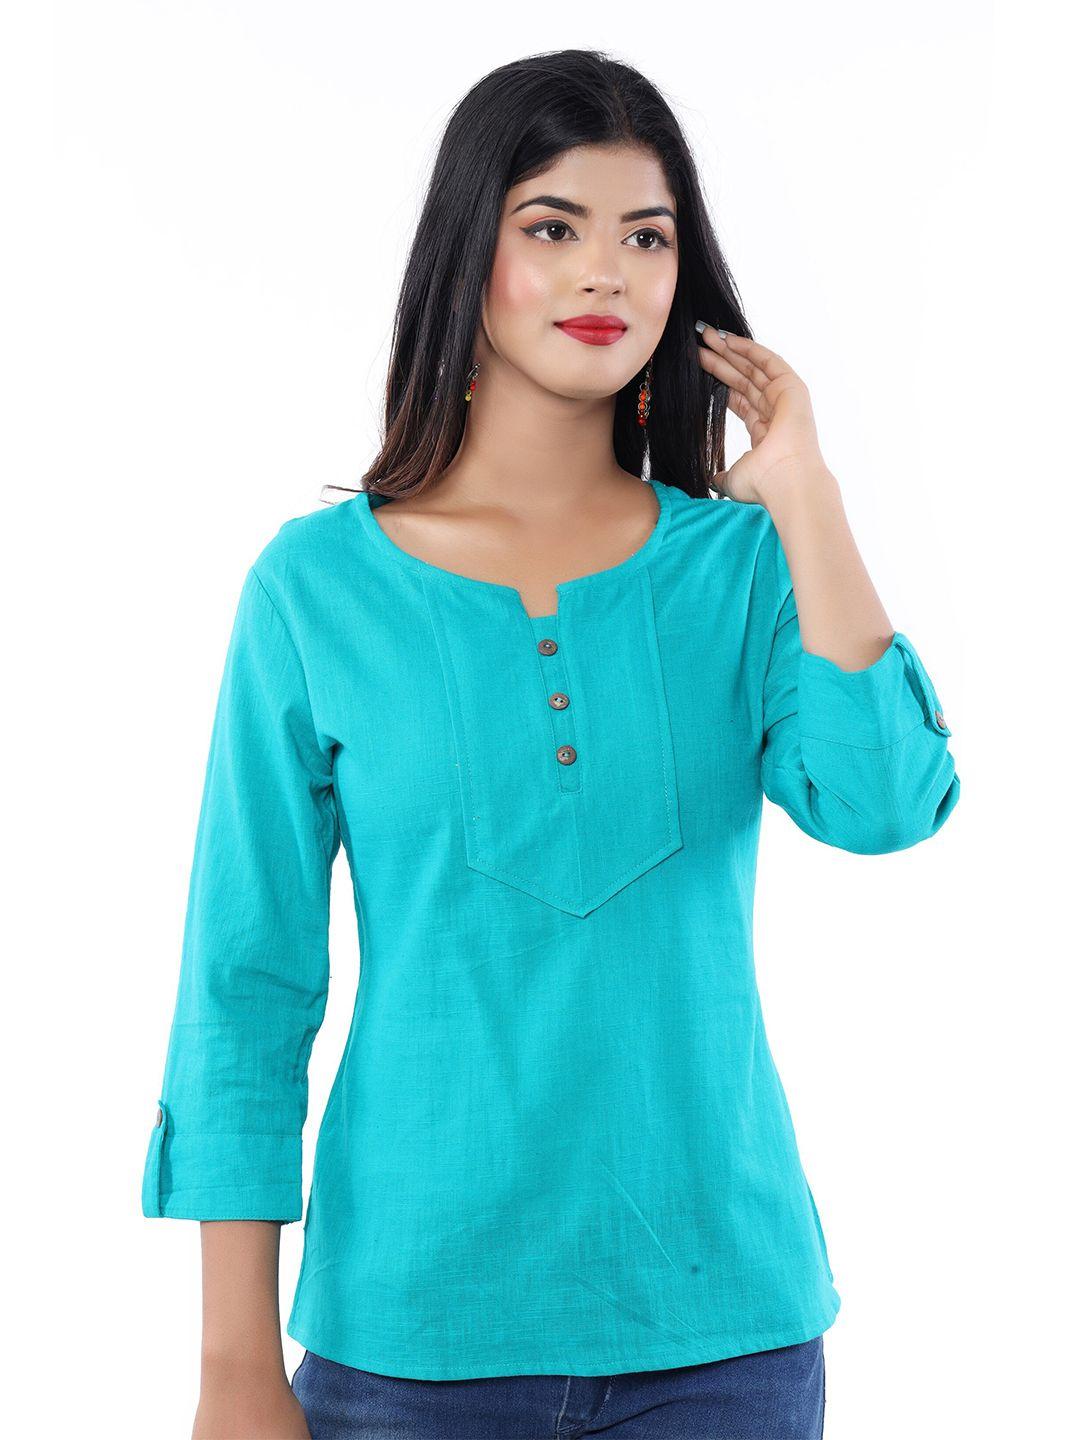 baesd round notched neck roll-up sleeves cotton ethnic top